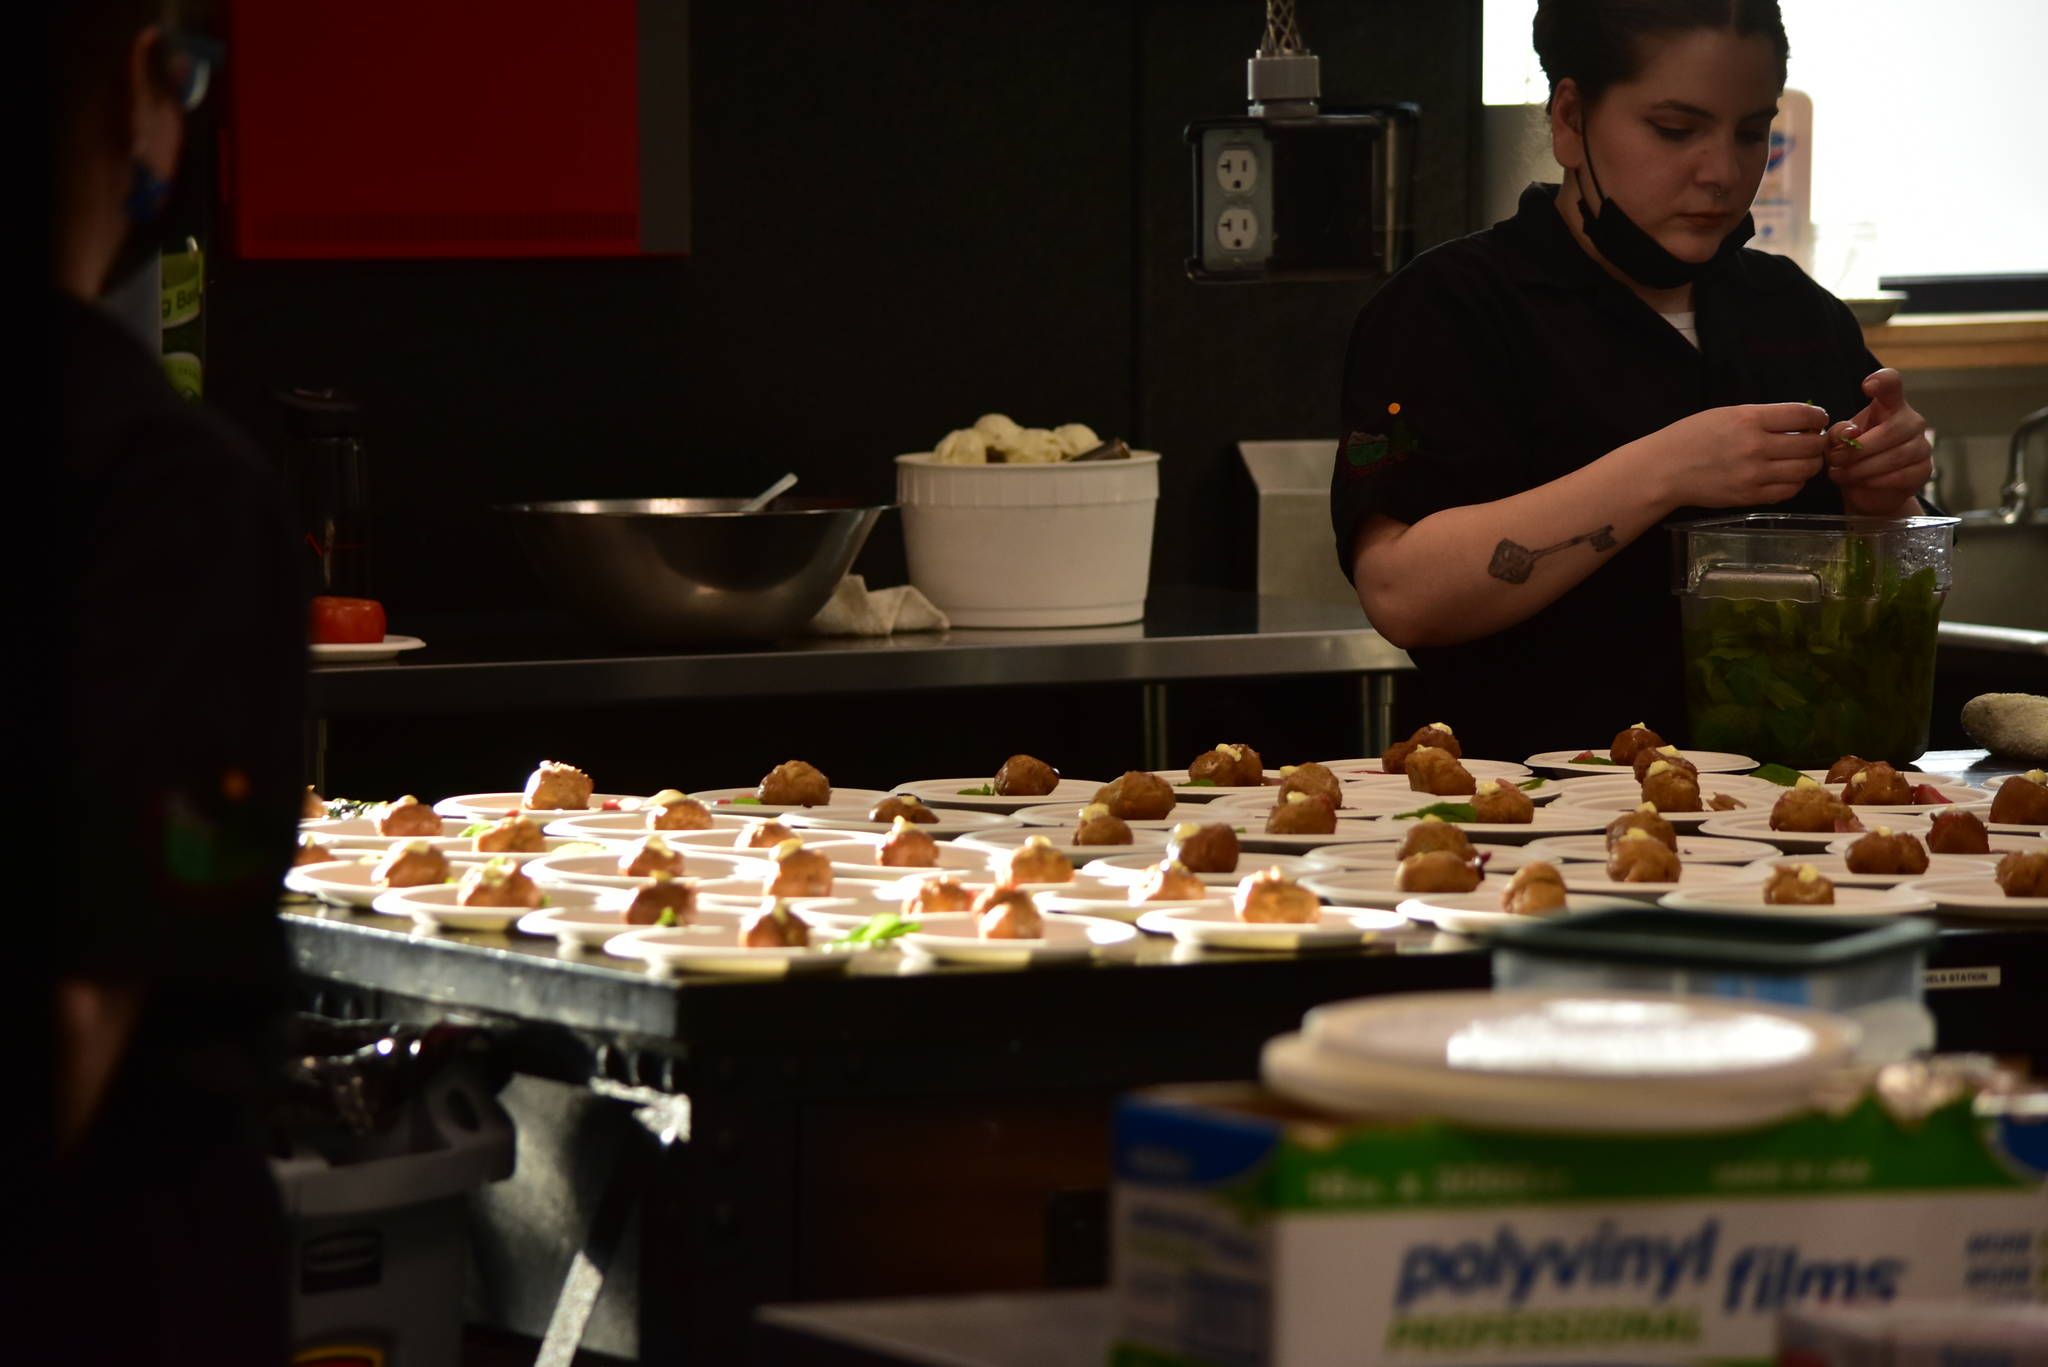 Red Spruce chefs prepare a dessert of New Orleans beignets with Alaskan foraged elderflower pastry cream, Alaskan devil’s club ice cream at a charity dinner highlighting Alaska and Louisiana seafood at Forbbiden Peak Brewery on Tuesday, June 8, 2021. (Peter Segall / Juneau Empire)